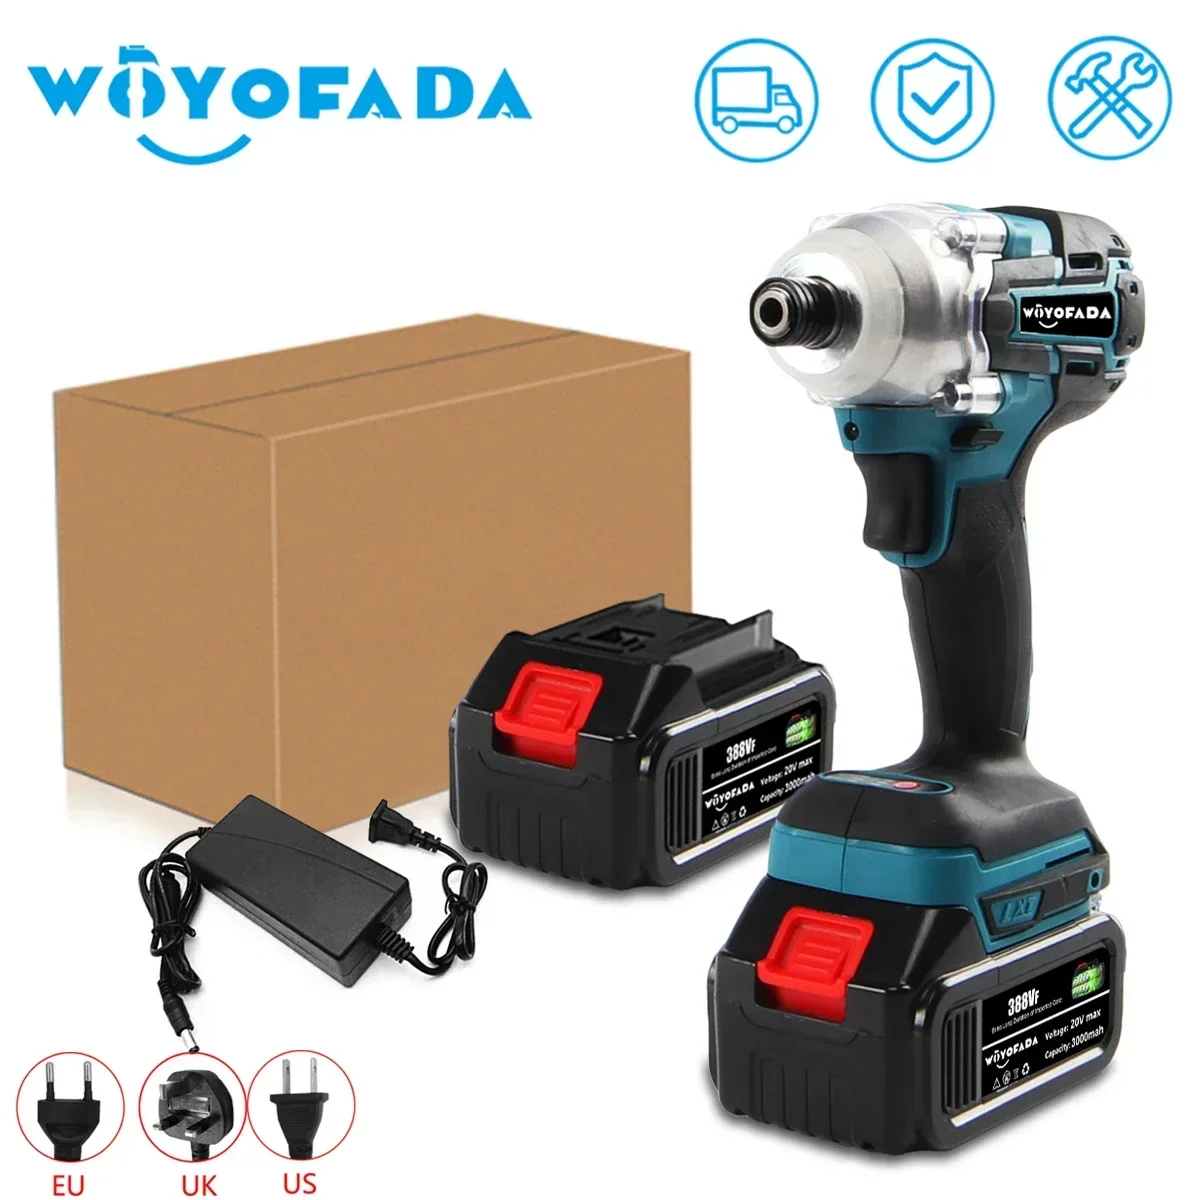 18V 350Nm Brushless Drill Cordless Electric Impact Wrench Rechargeable 1/4 Square Drive Wrench DIY Power Tool For Makita Battery ca ps800 dr dc10 dc coupler aa dummy battery usb drive power adapter cable for canon a1300 a1400 a800 a810 sx150 is sx160